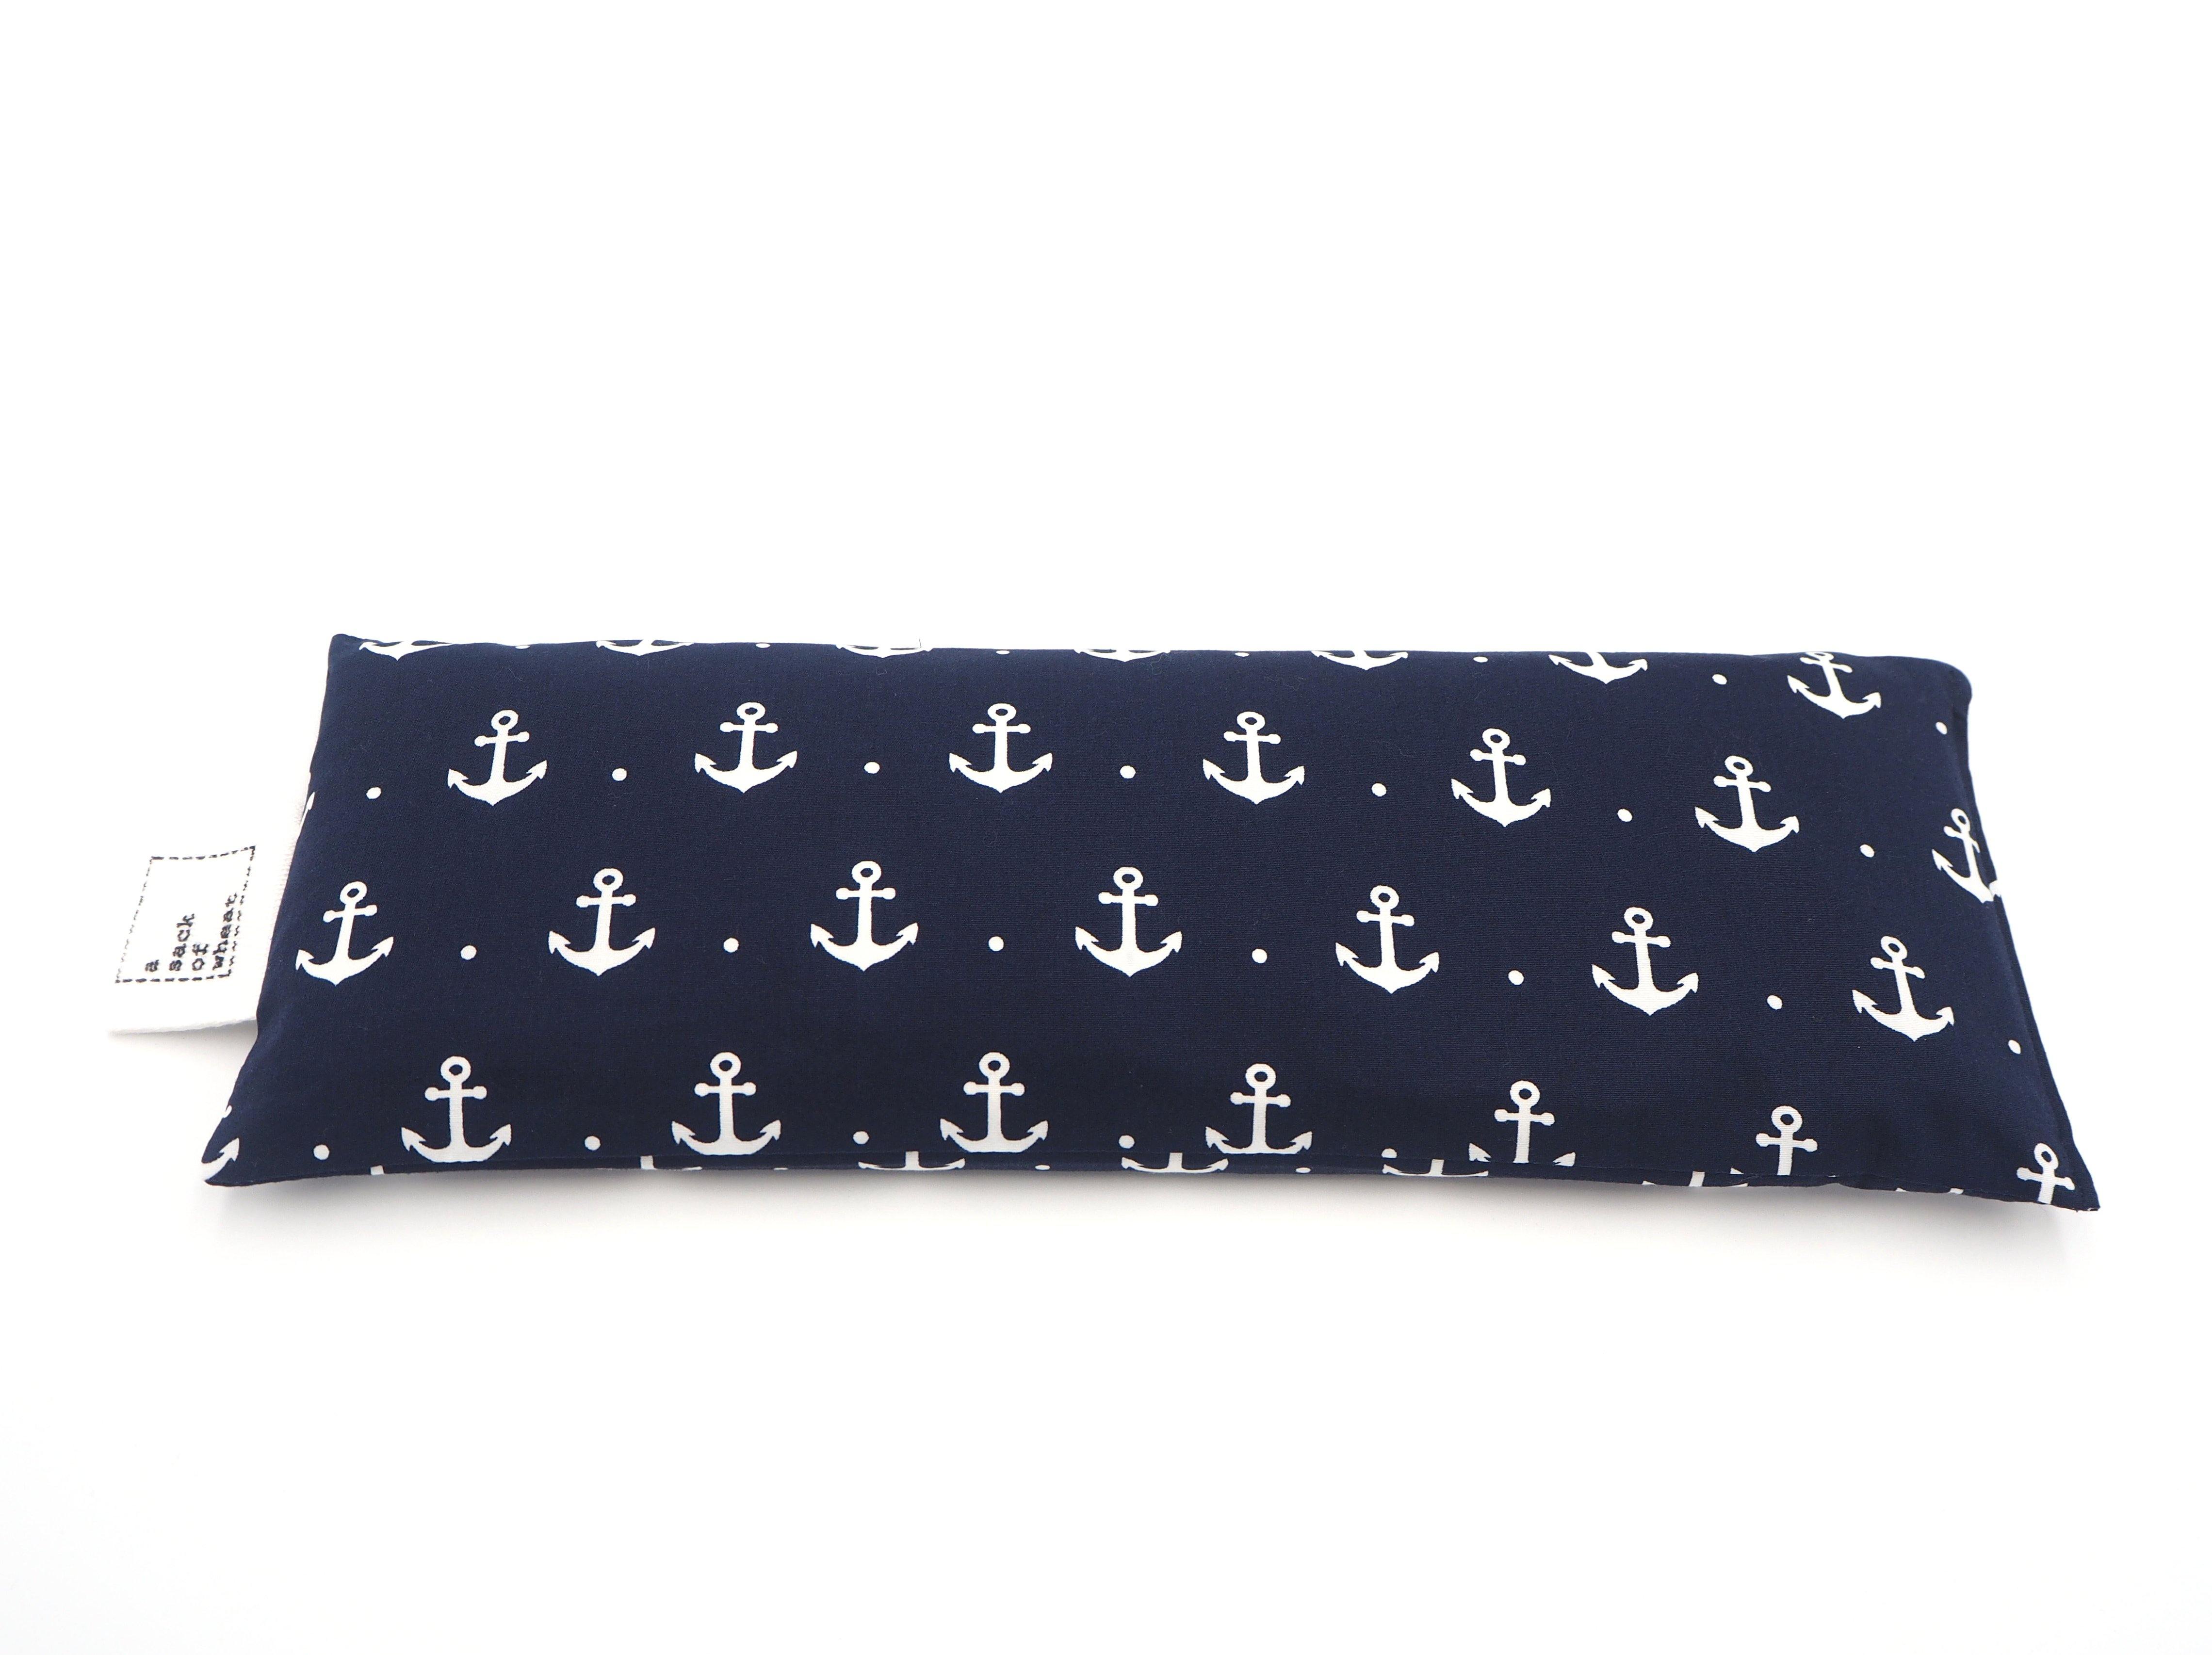 Flat view of A Sack Of Wheat, featuring classic ship anchors on a royal navy blue background, 100% cotton fabric